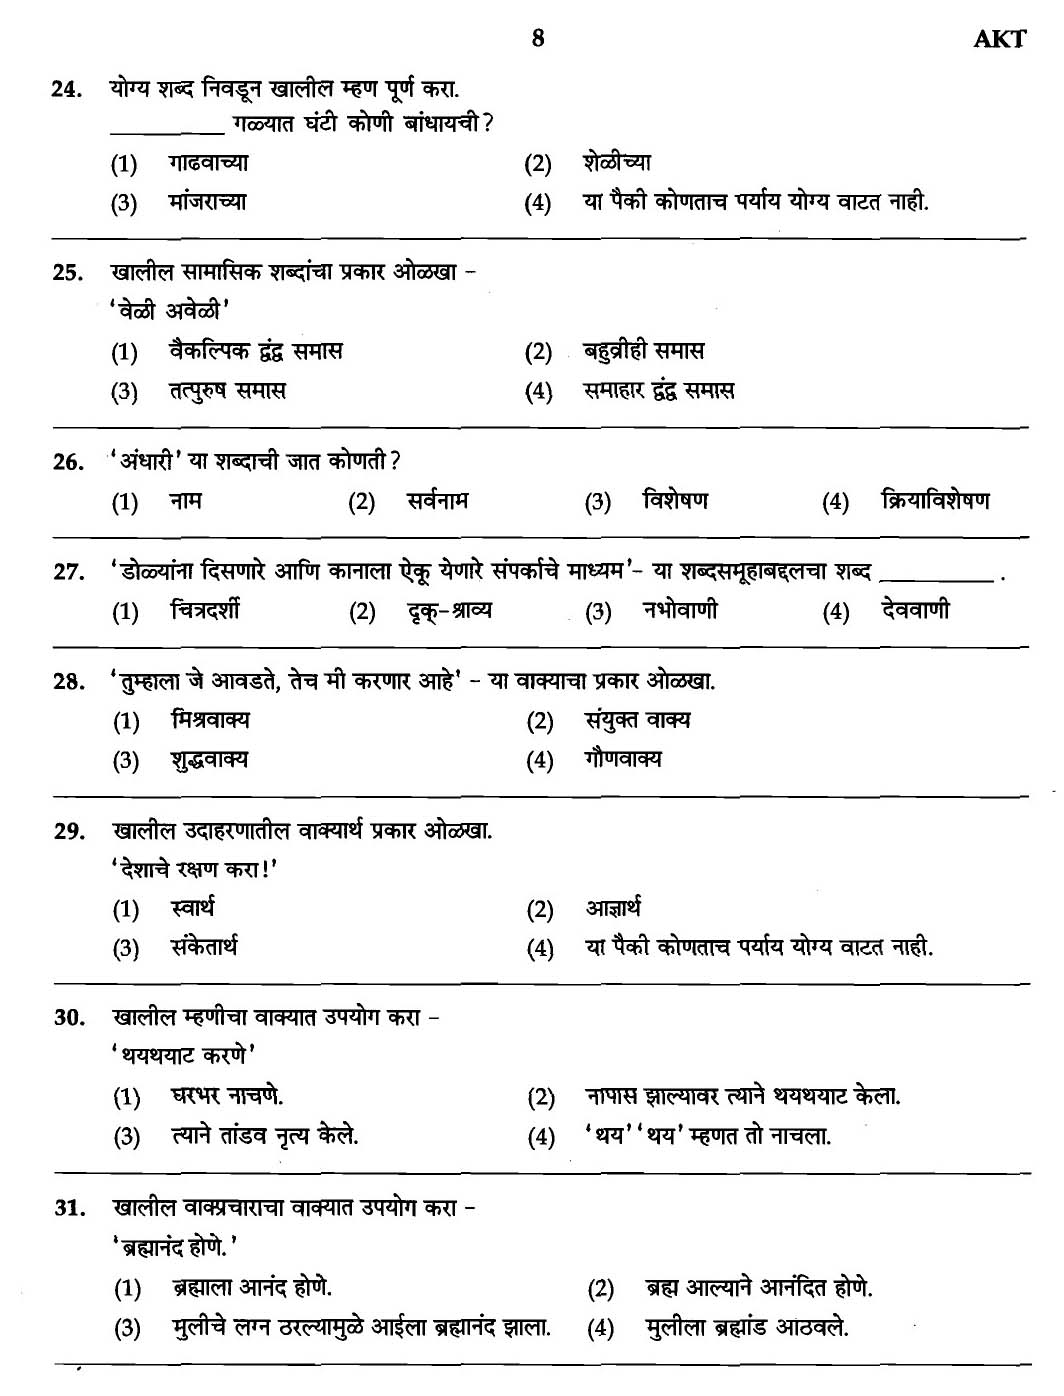 MPSC Agricultural Services Exam 2007 General Question Paper 6